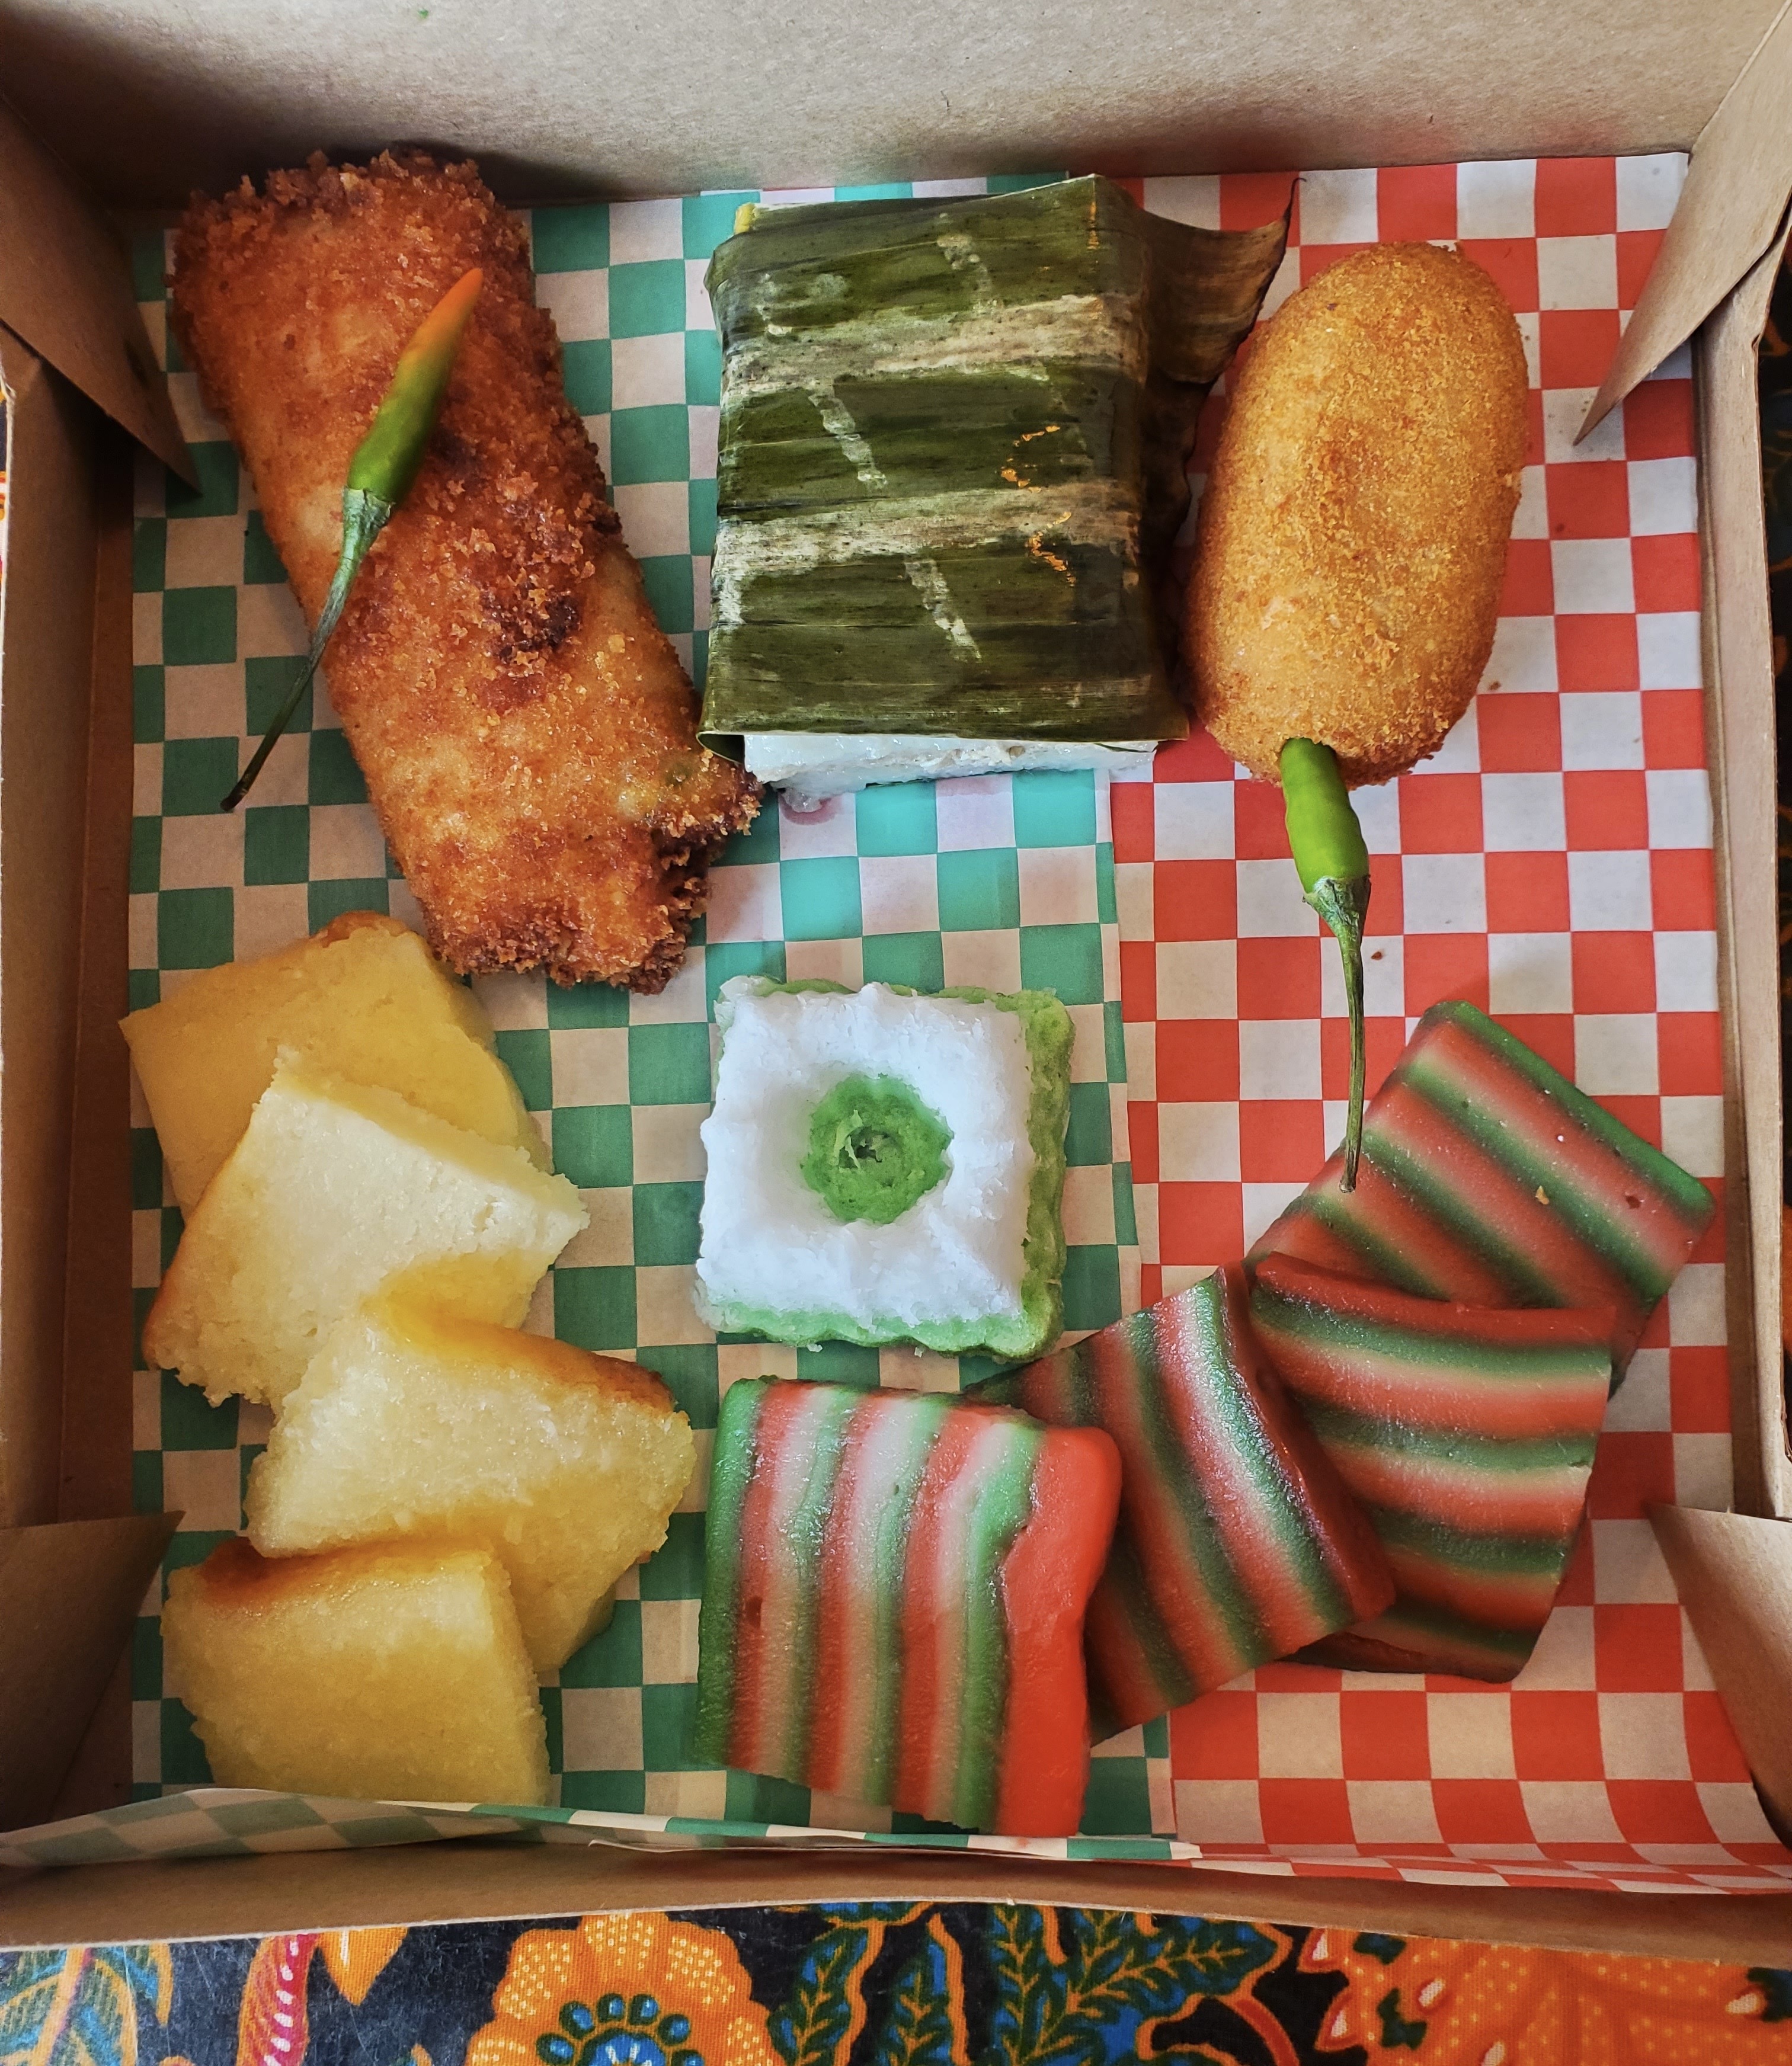 A box lined with green- and red-checkered paper contains an assortment of Indonesian snacks.